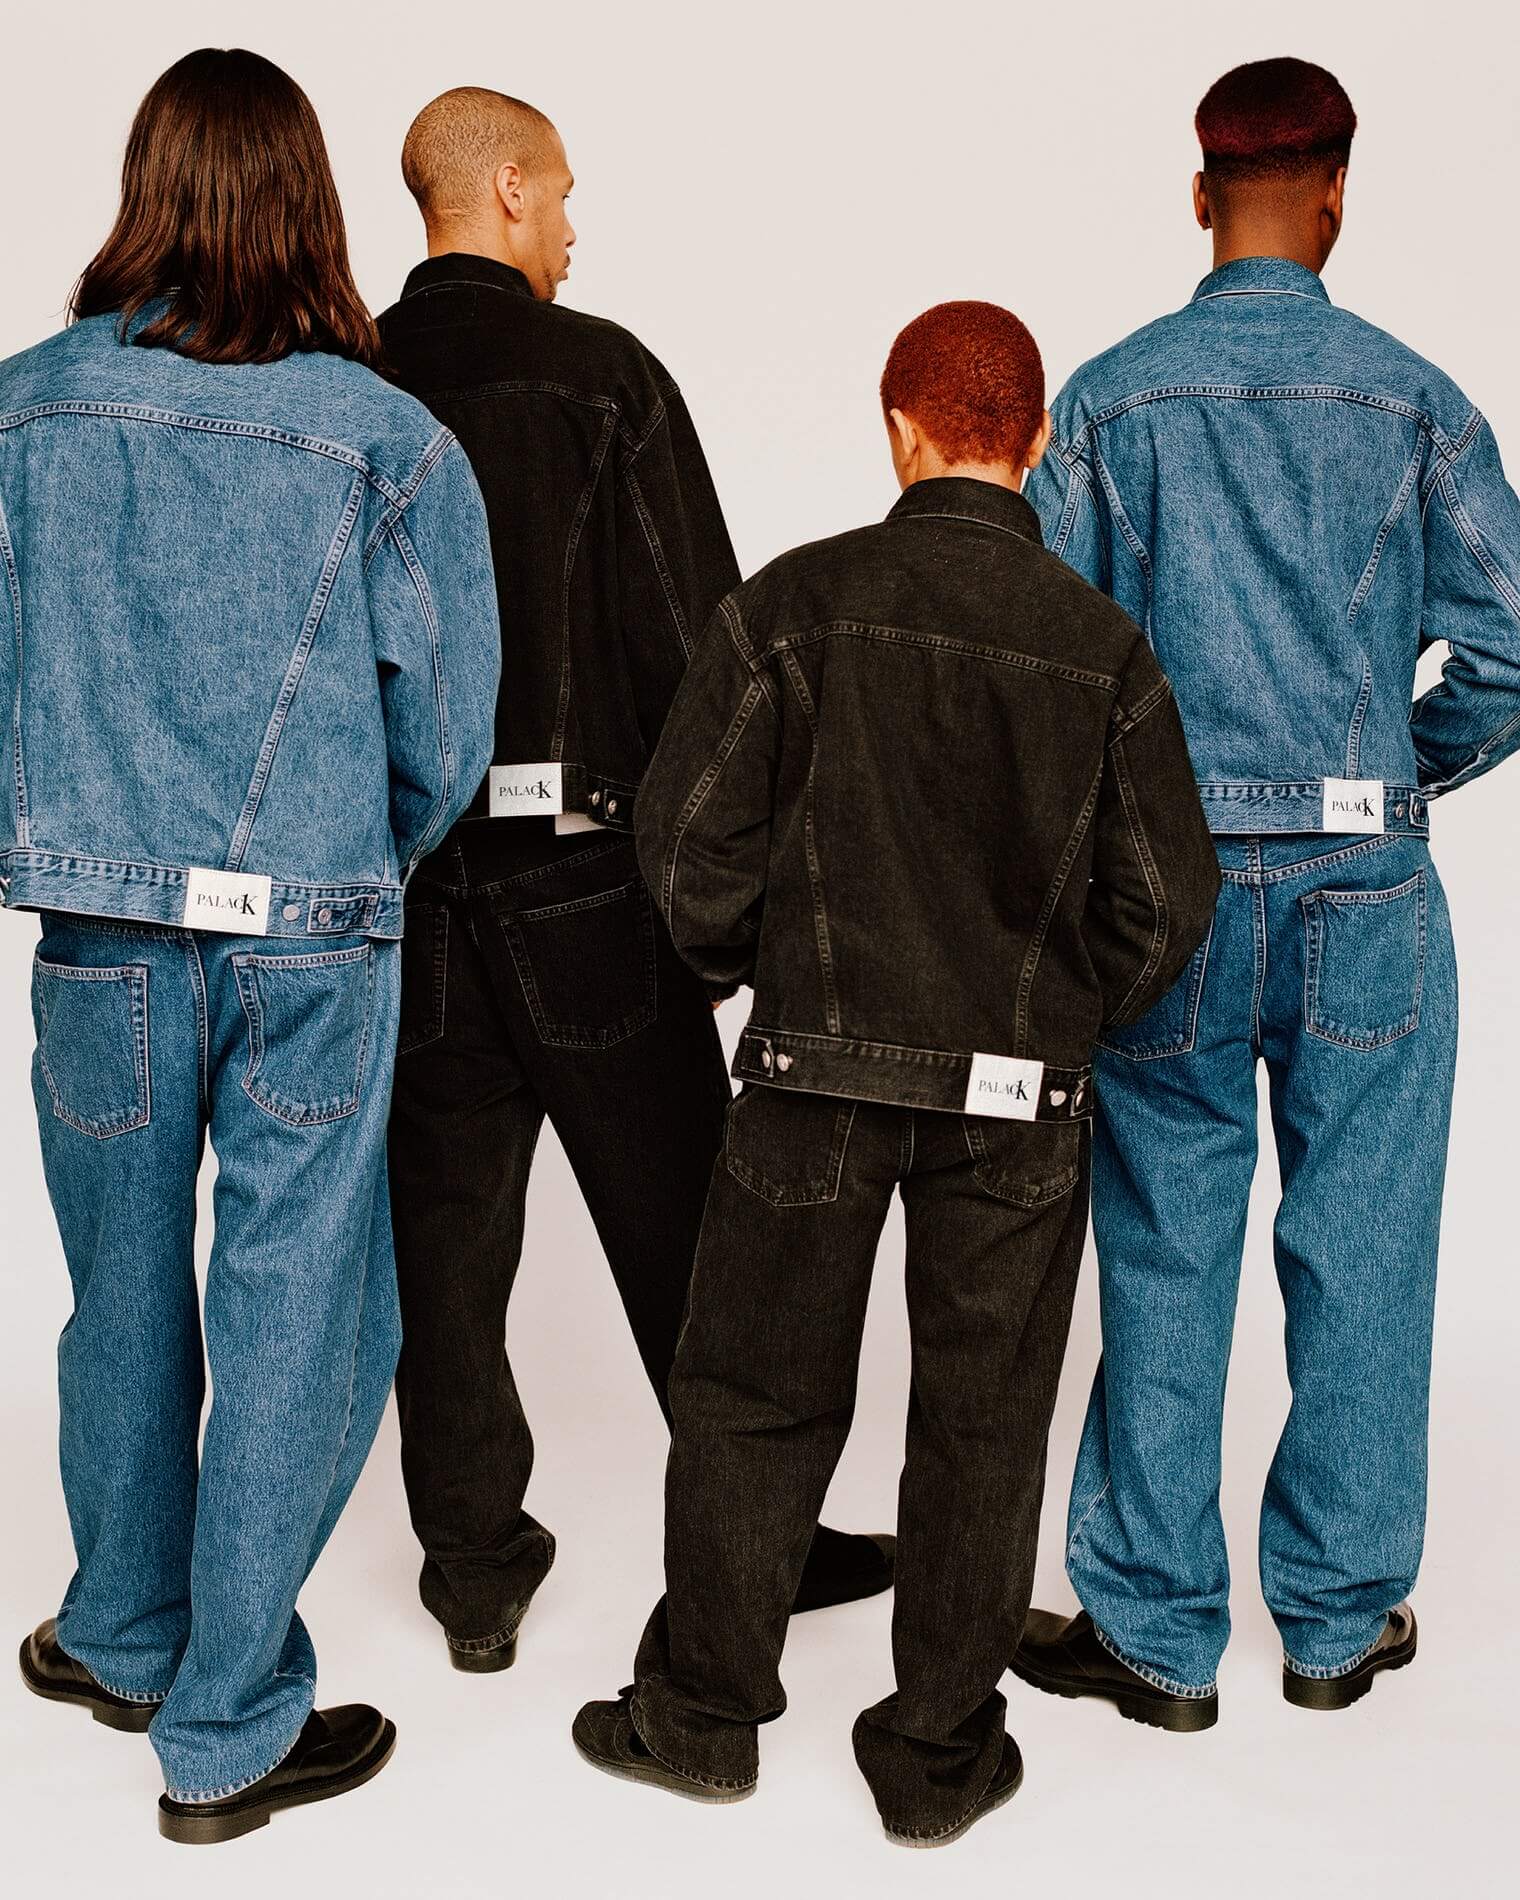 Calvin Klein And Palace Team Up For A Collaborative Collection